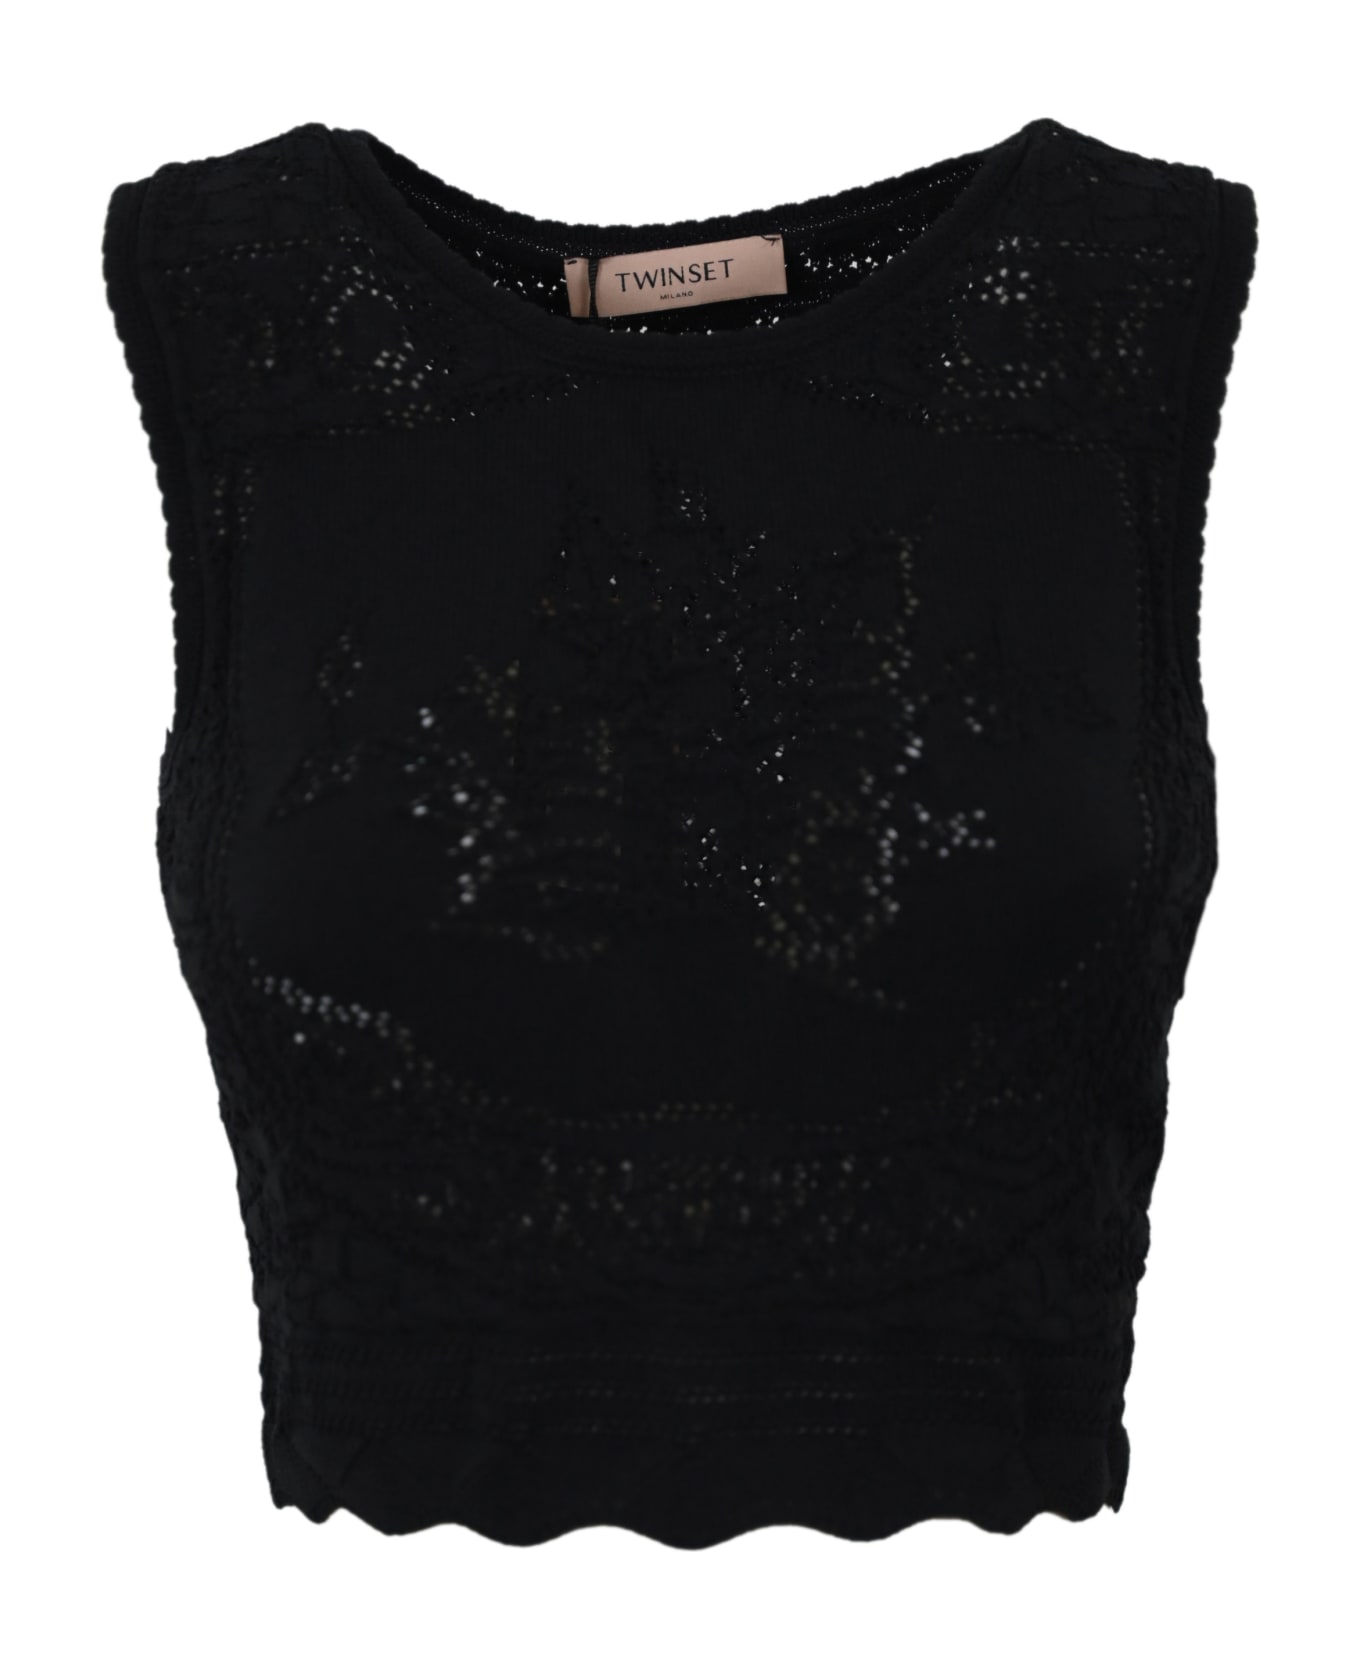 TwinSet Crochet Cropped Top TwinSet - BLACK